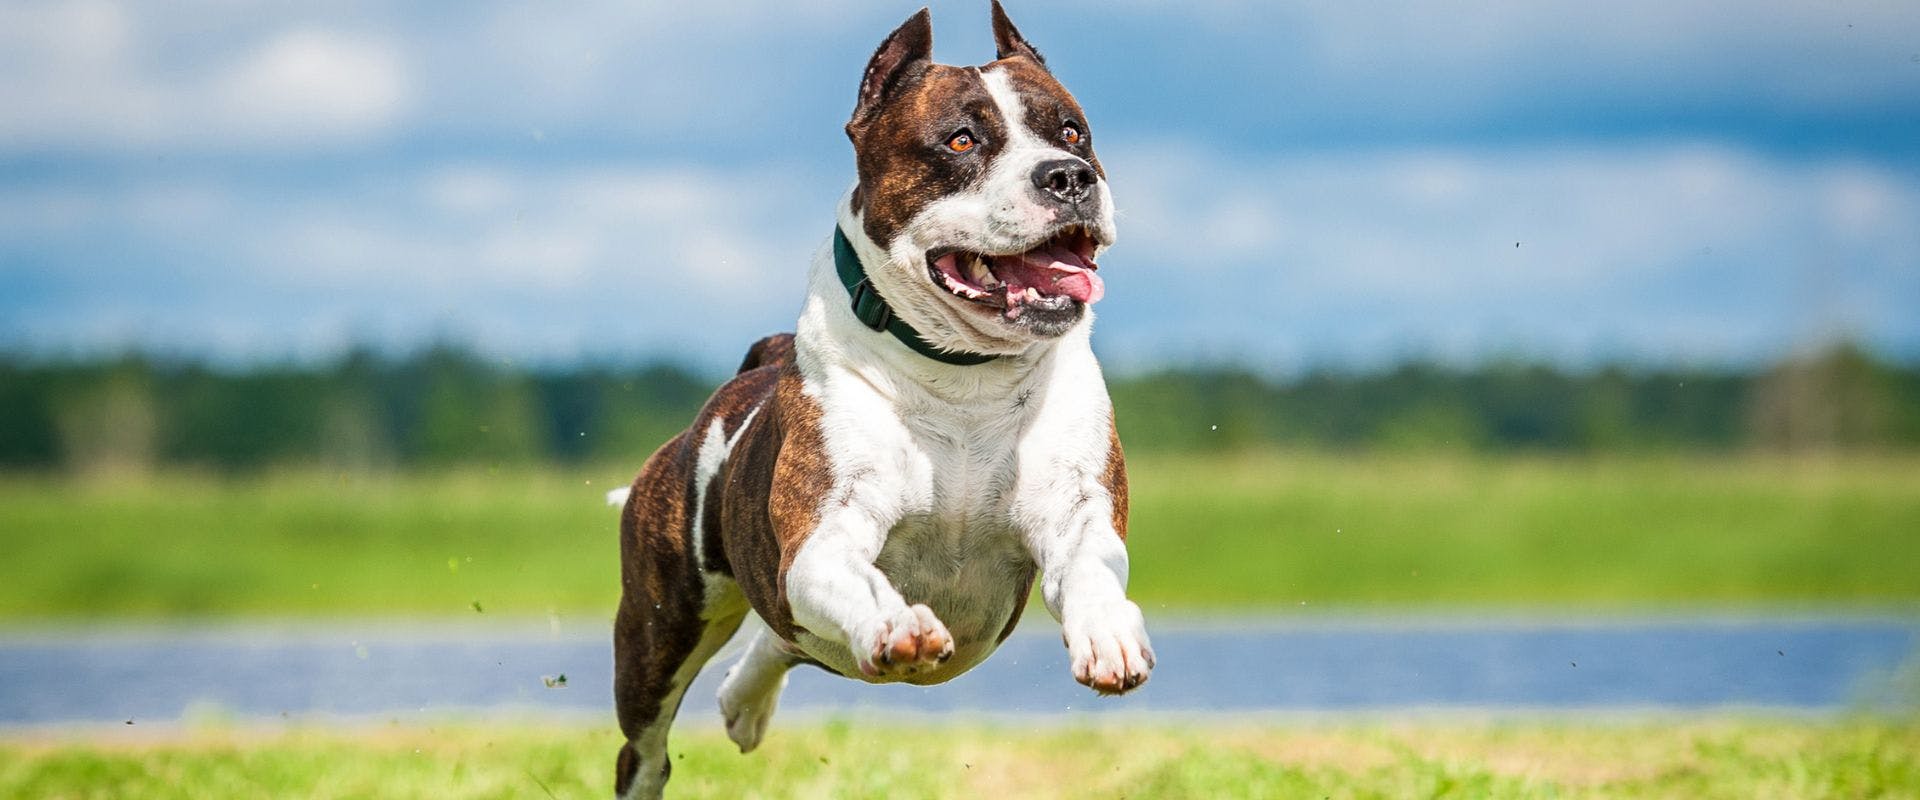 American Staffordshire Terrier running outdoors